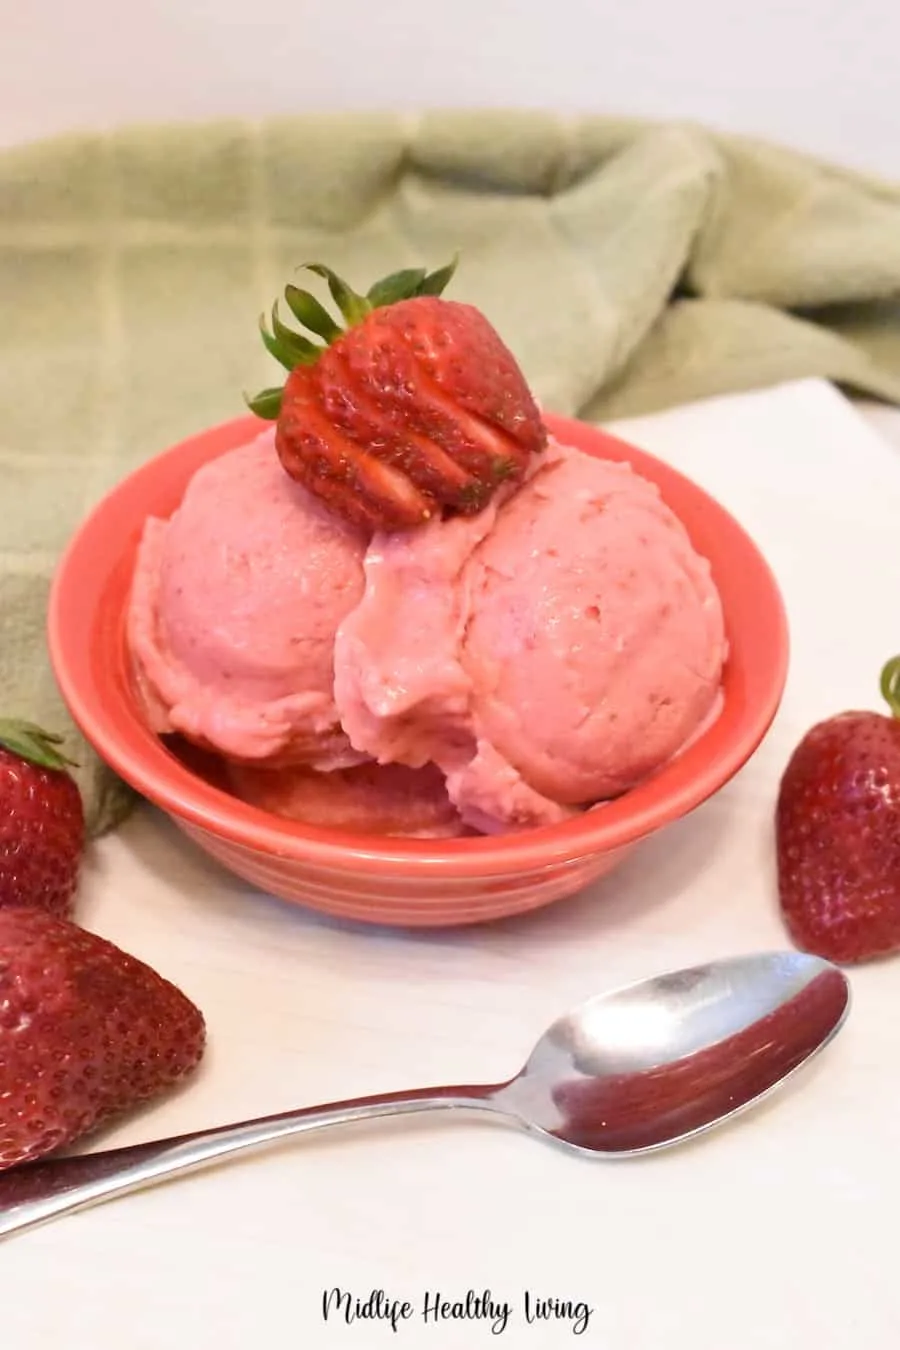 Here we see a dish full of the delicious WW strawberry frozen yogurt. 